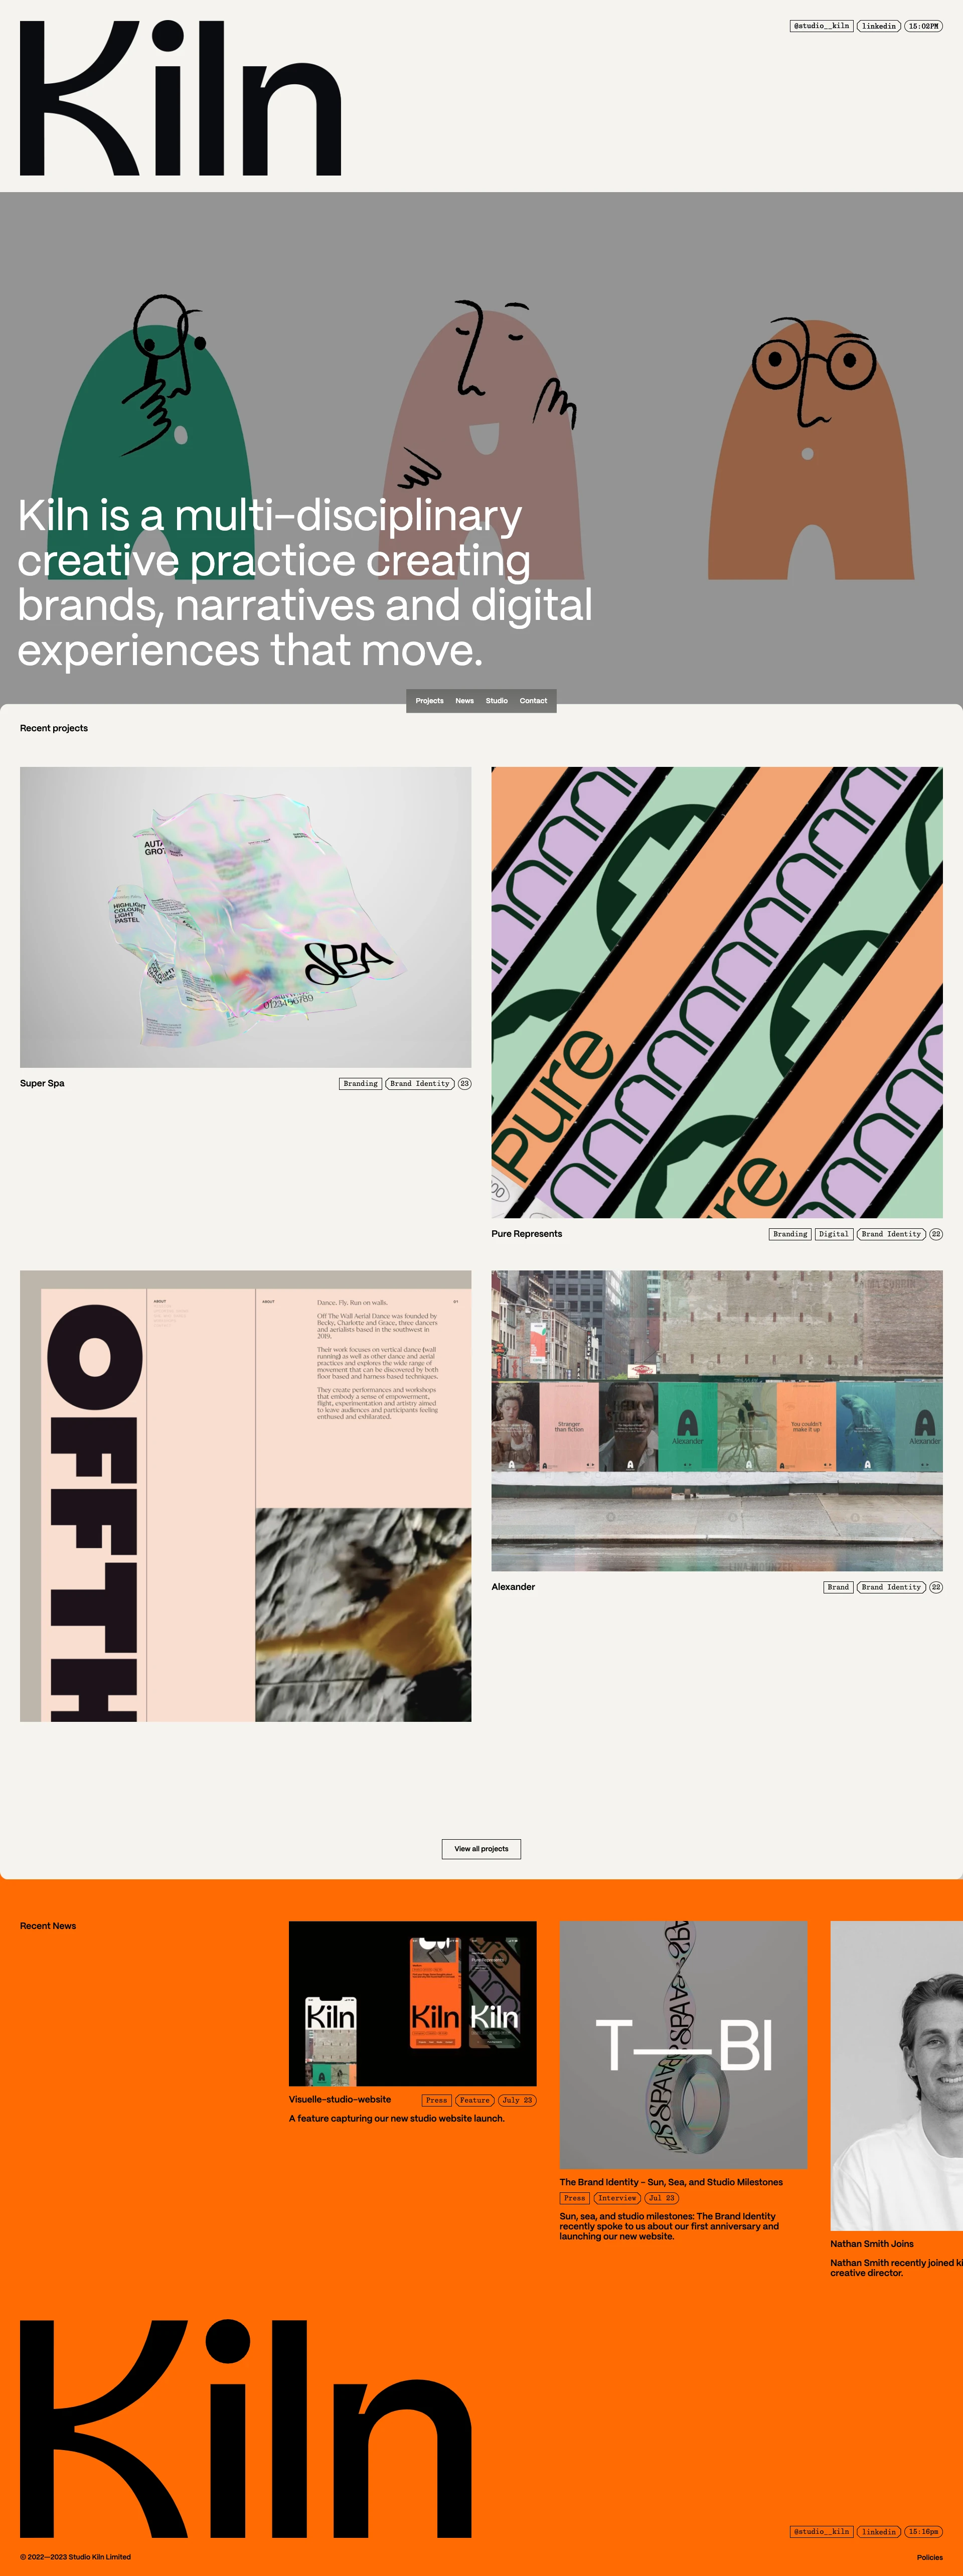 Kiln Landing Page Example: Studio Kiln is a multidisciplinary creative practice creating brands, narratives and digital experiences that move.